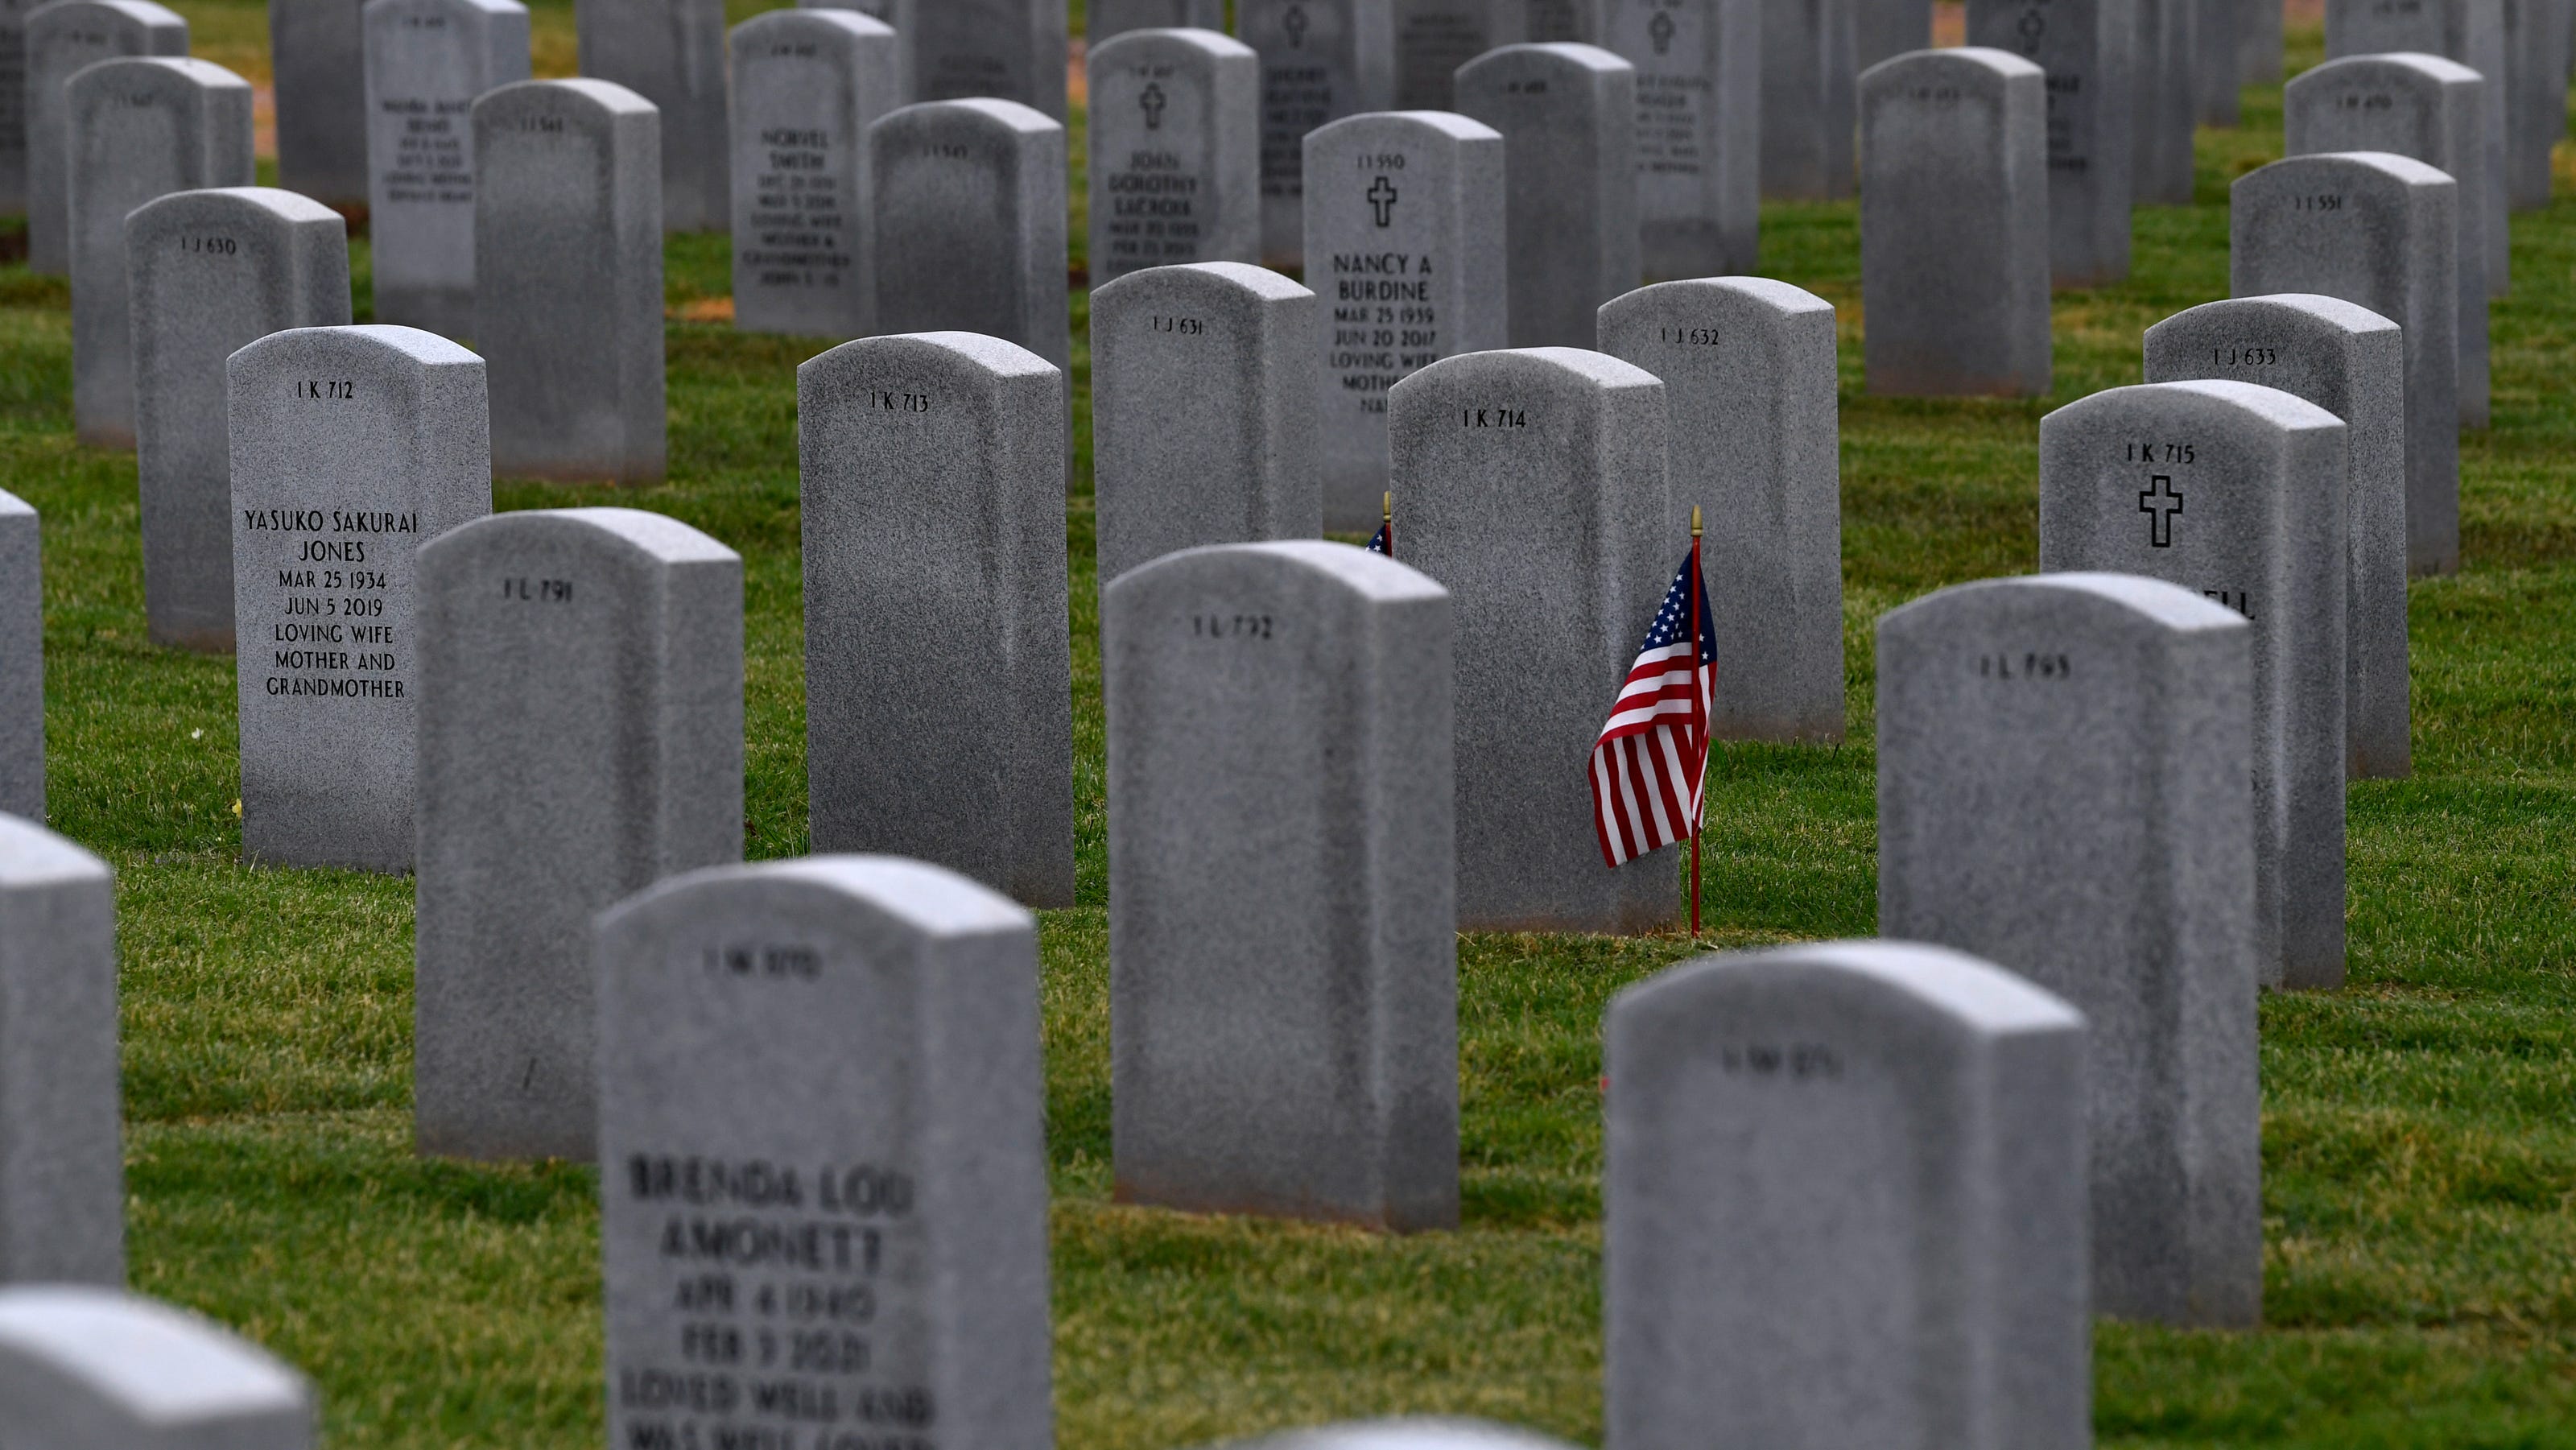  State proposal to put Taylor County in charge of veterans cemetery gets cool reception 